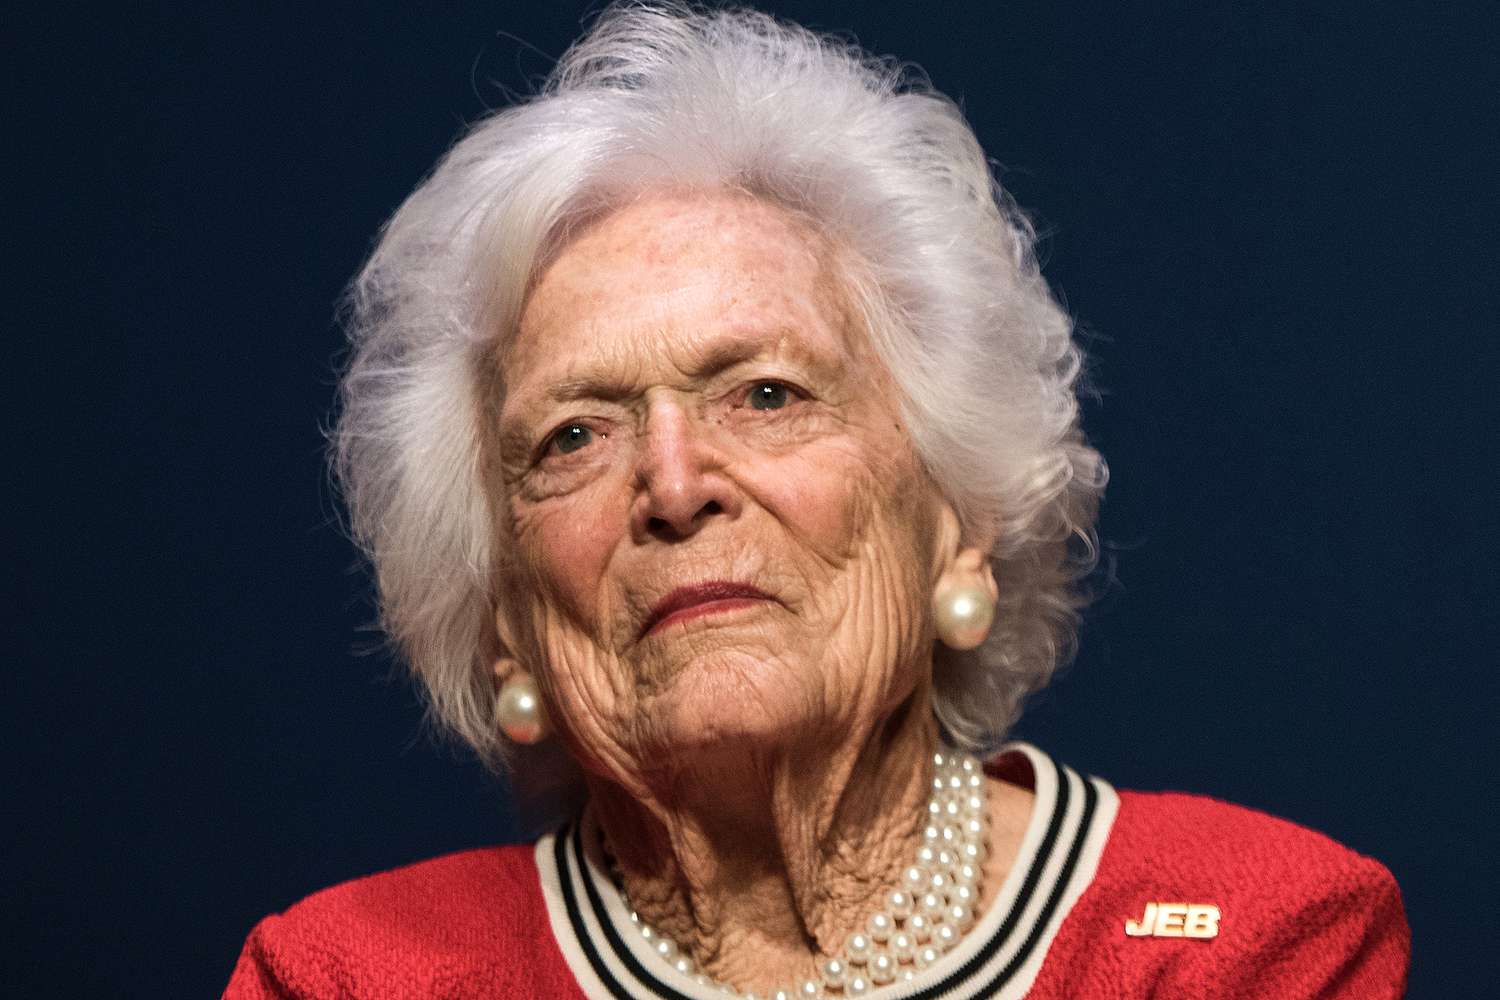 Jeb Bush Campaigns With Mother Barbara Bush One Day Before SC Primary